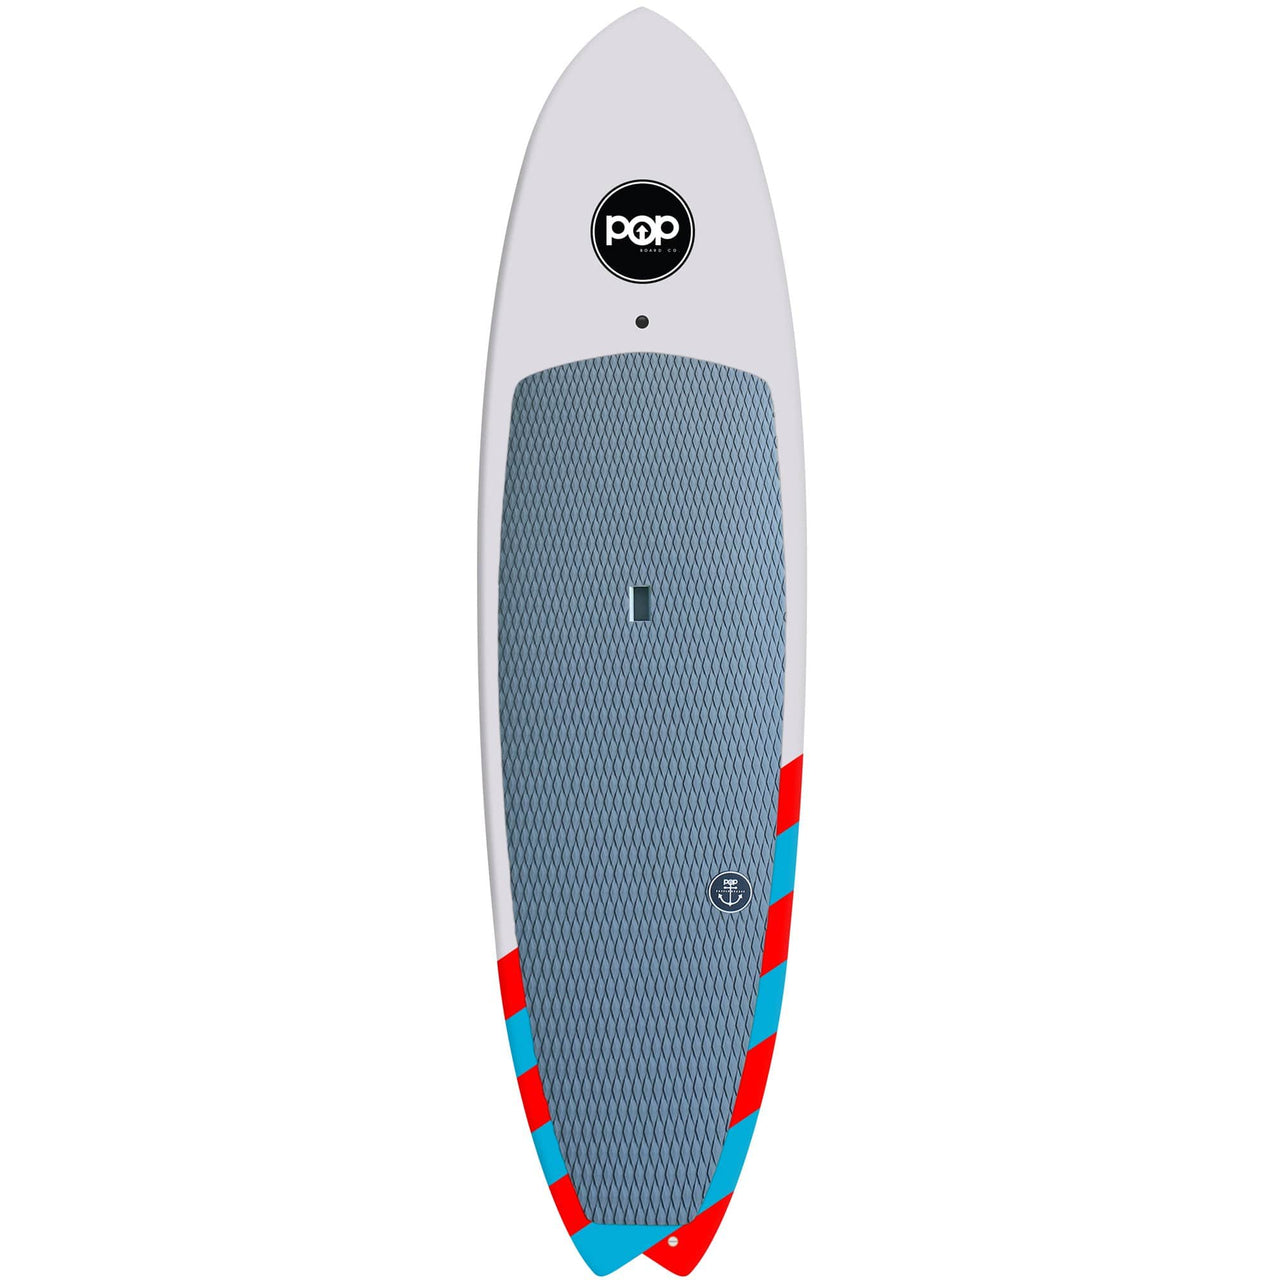 POP Board Co 9'6" Saltwater Beaver Stand Up Paddle Board - Red/Blue - Good Wave